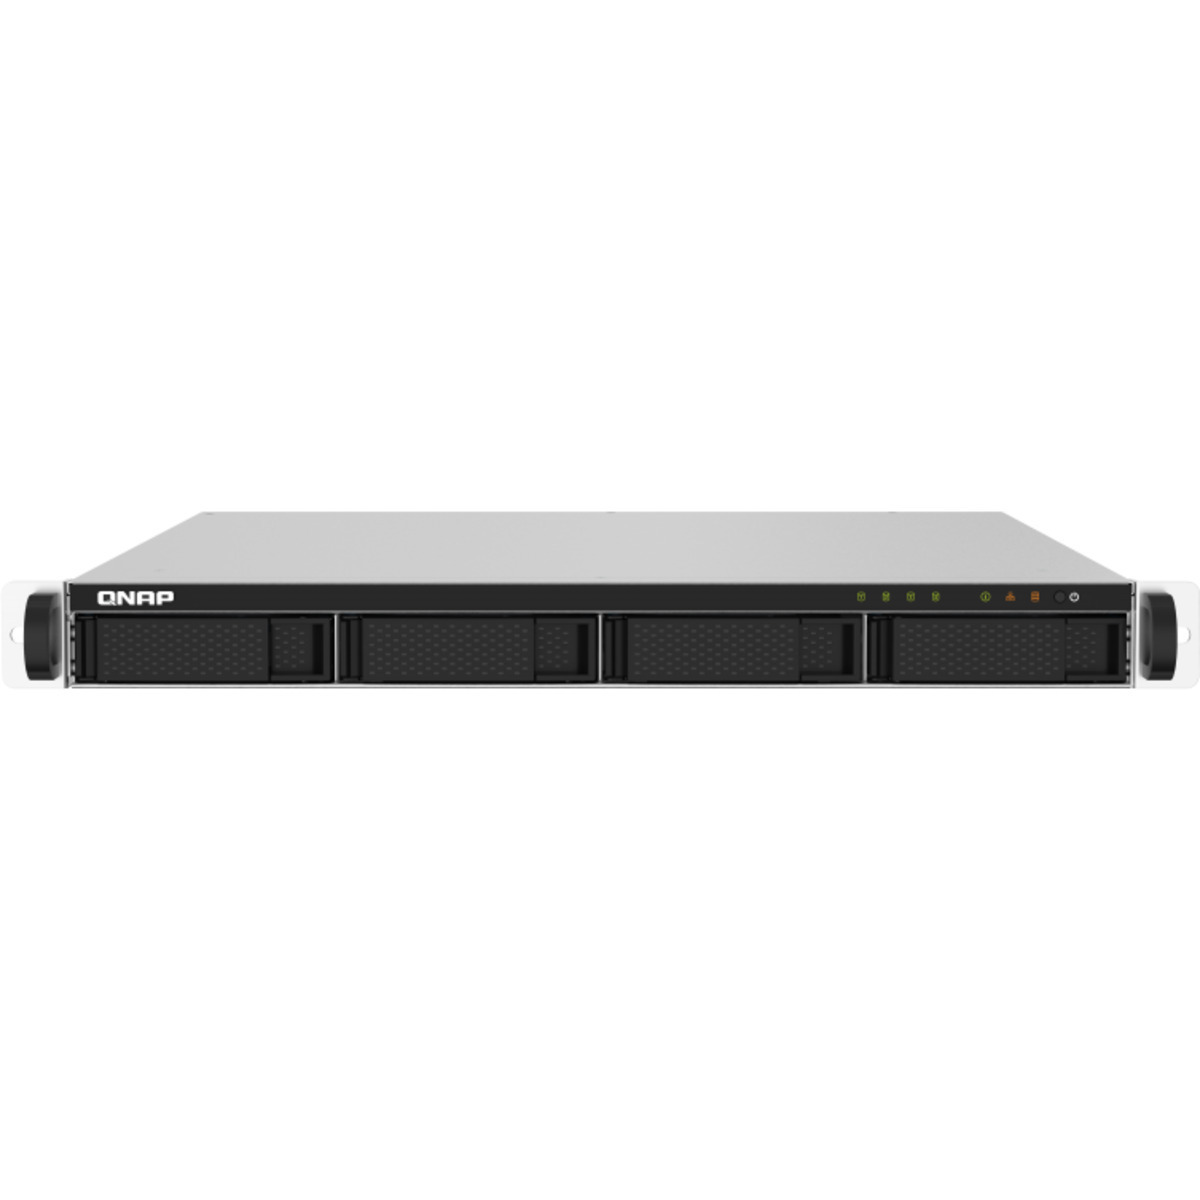 QNAP TS-432PXU 48tb 4-Bay RackMount Personal / Basic Home / Small Office NAS - Network Attached Storage Device 2x24tb Seagate EXOS X24 ST24000NM002H 3.5 7200rpm SATA 6Gb/s HDD ENTERPRISE Class Drives Installed - Burn-In Tested - FREE RAM UPGRADE TS-432PXU